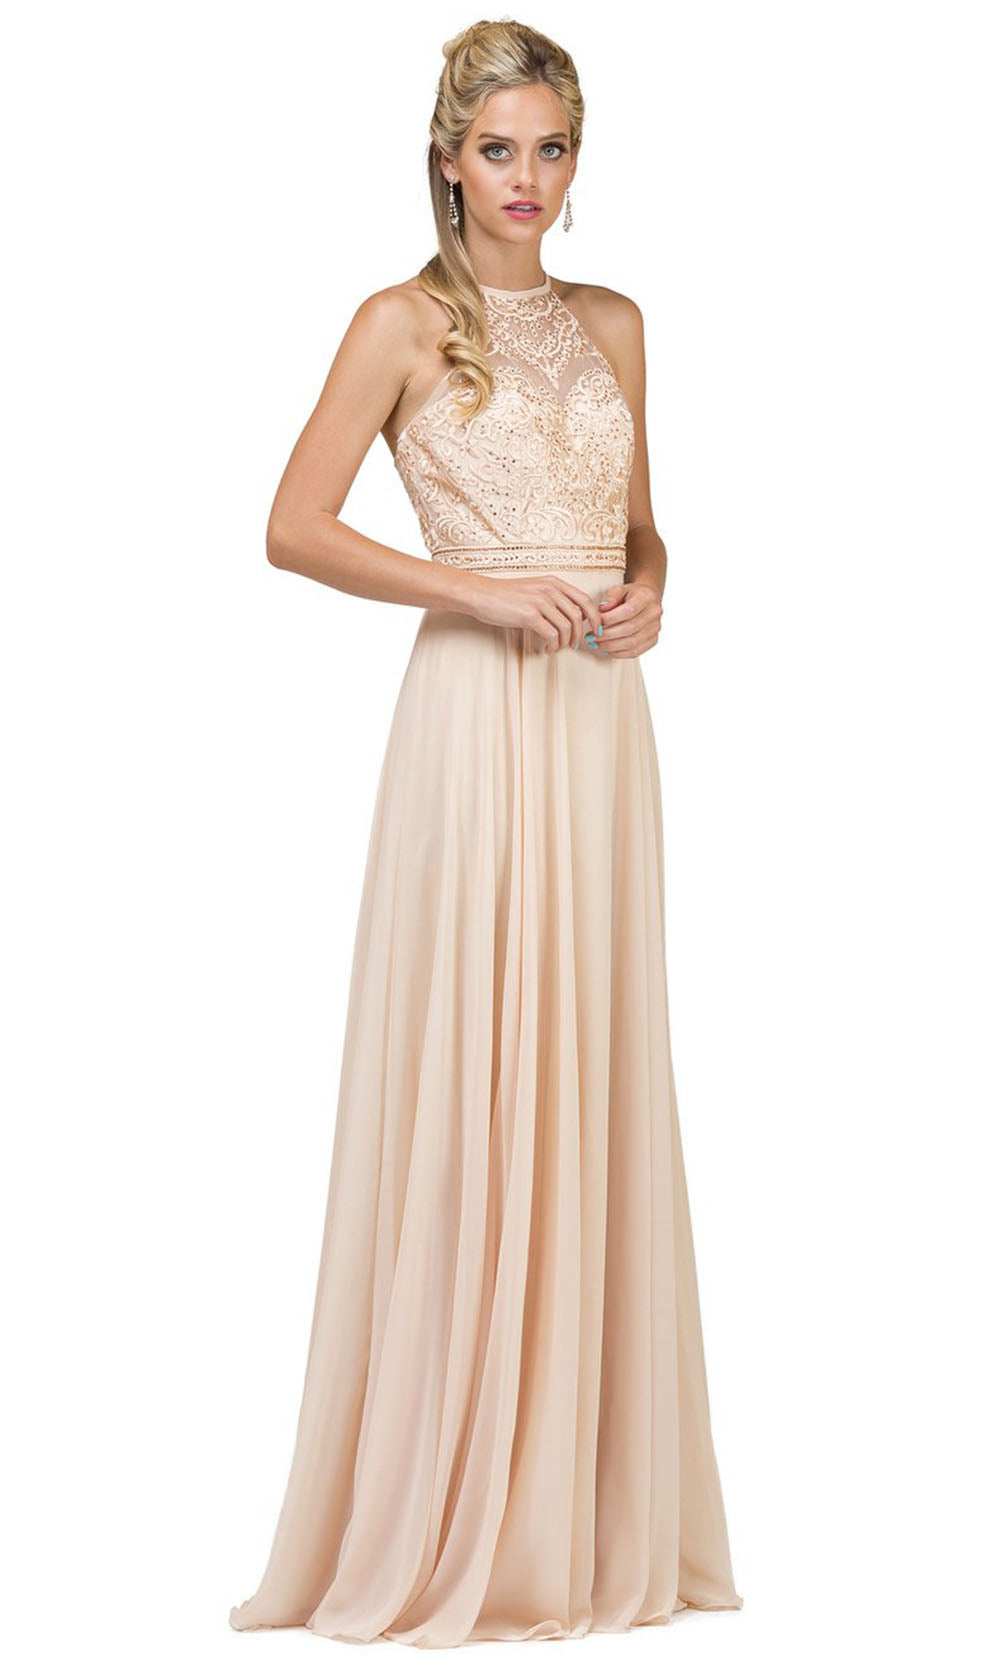 Dancing Queen - 2092 Embroidered Halter Neck A-Line Dress In Neutral